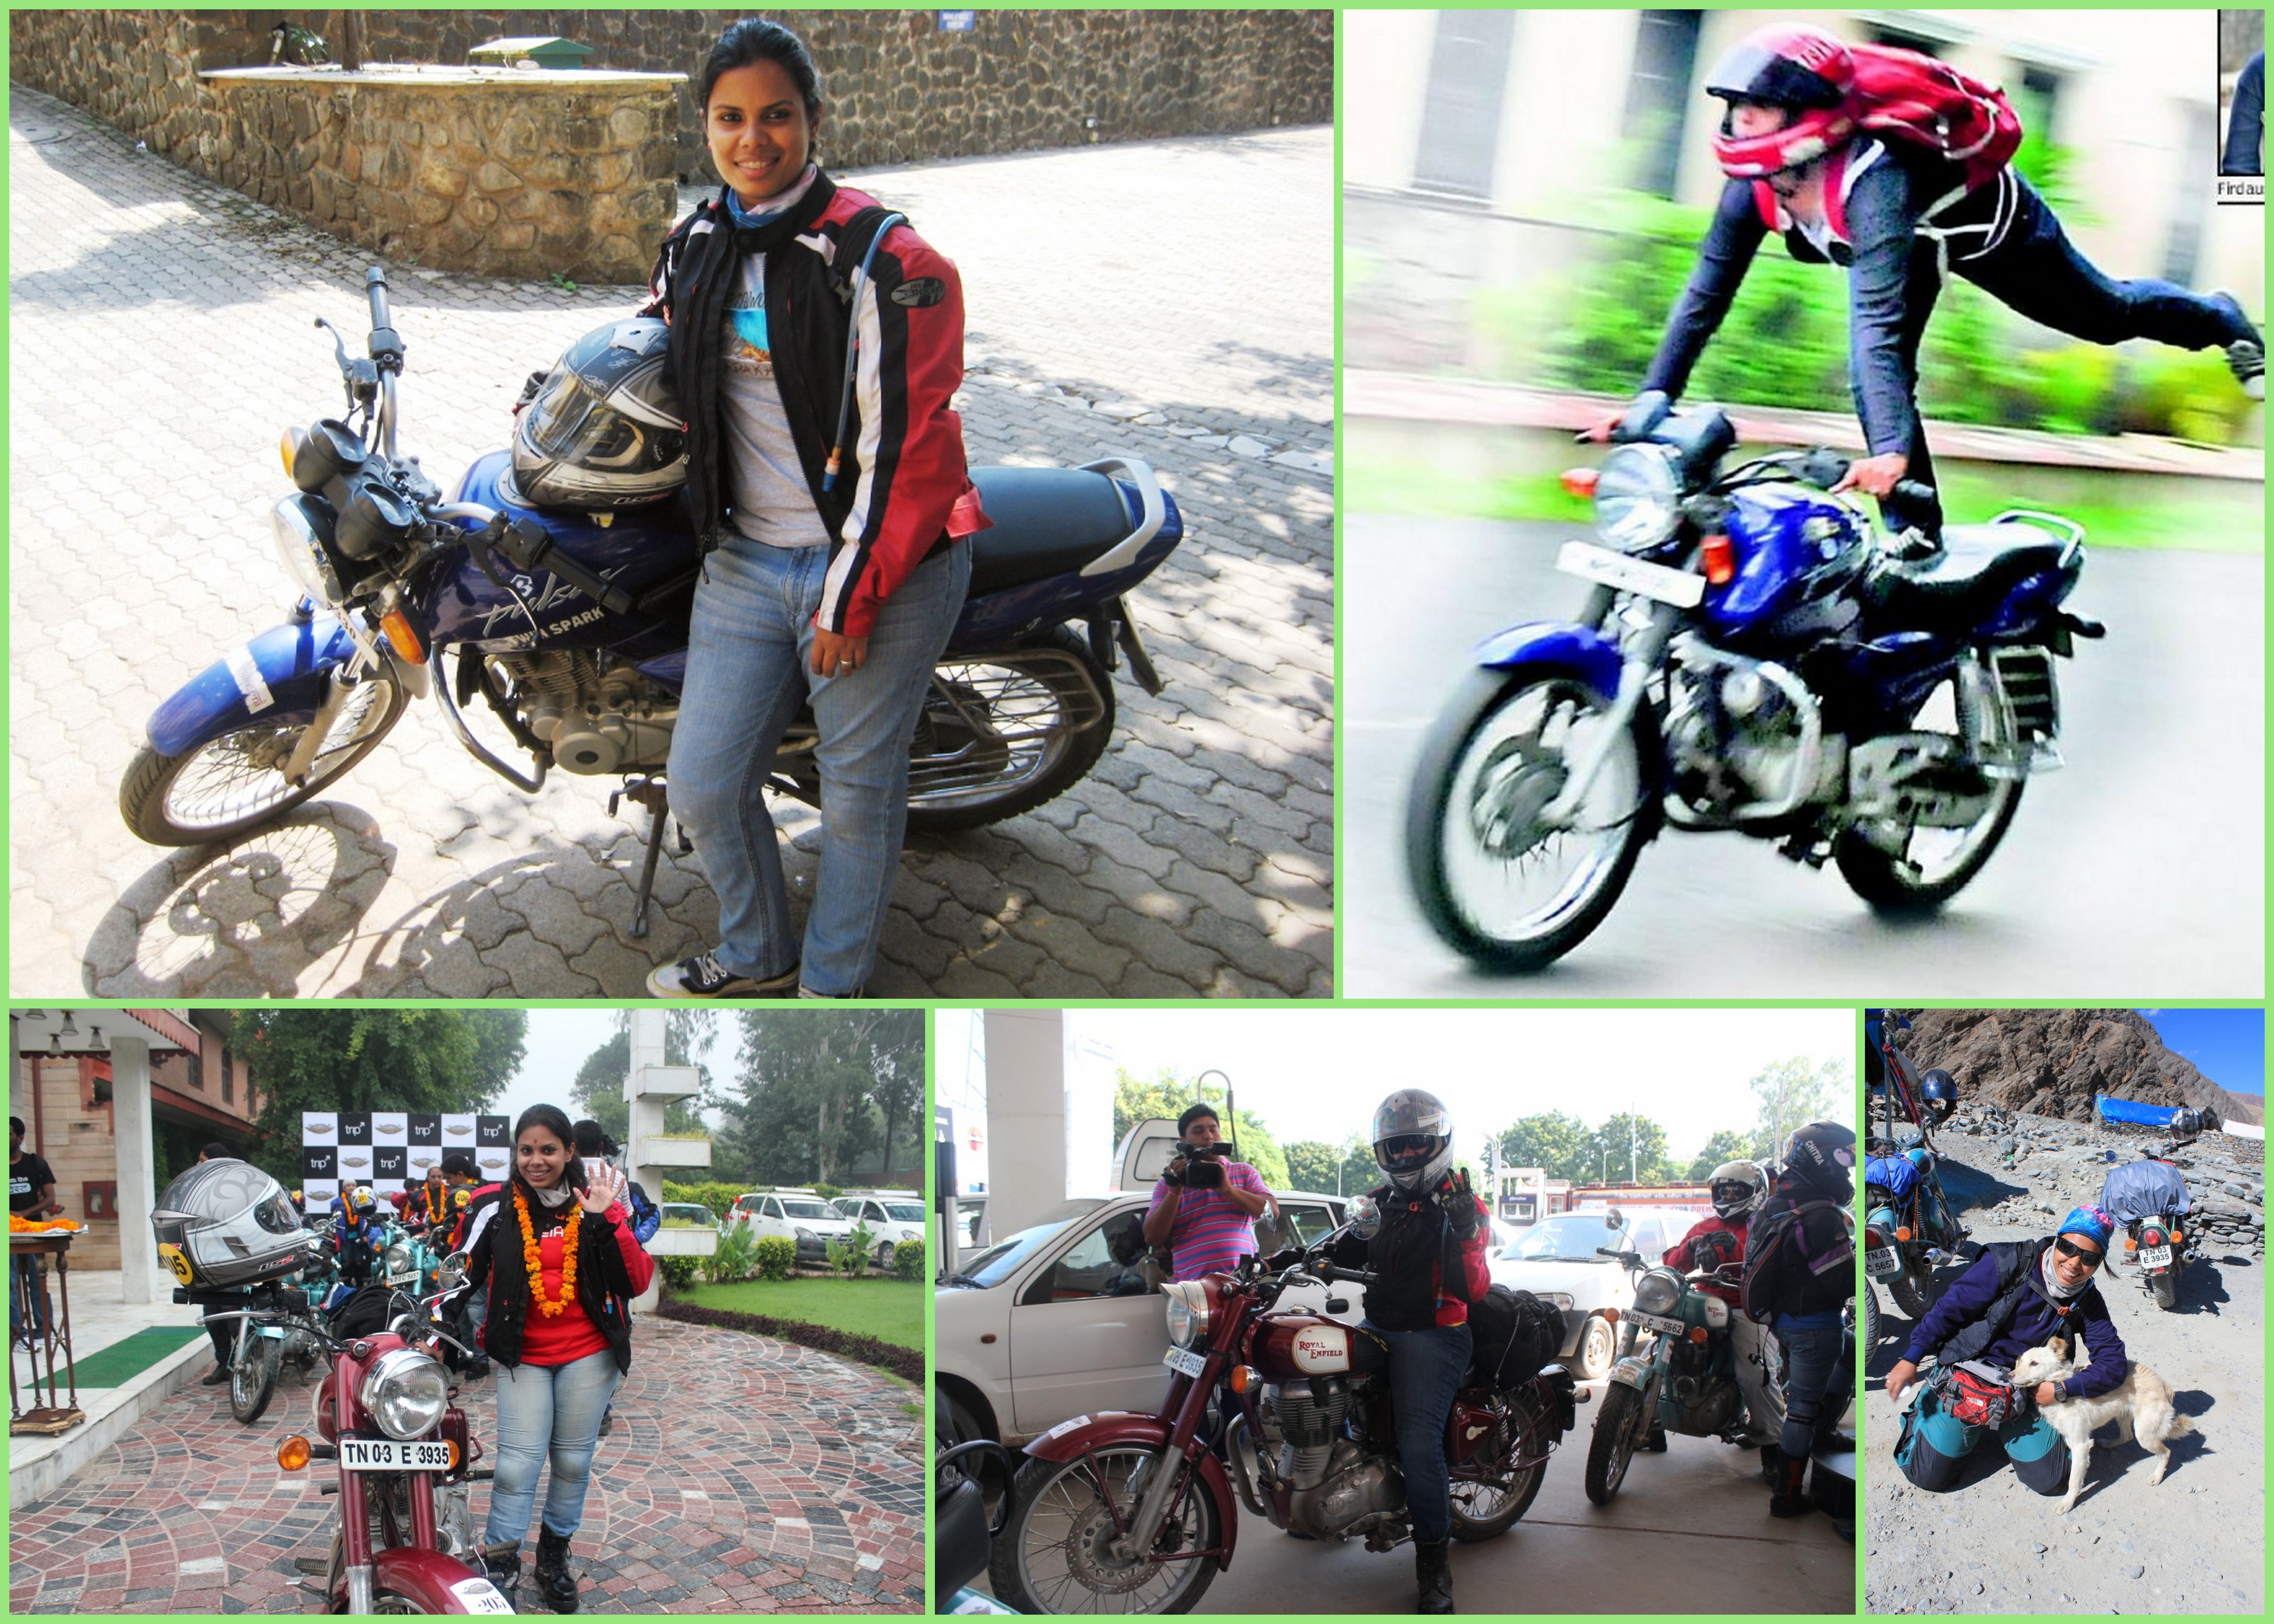 Profile of a Female Motorcyclist Meet Firdaus - photo collage